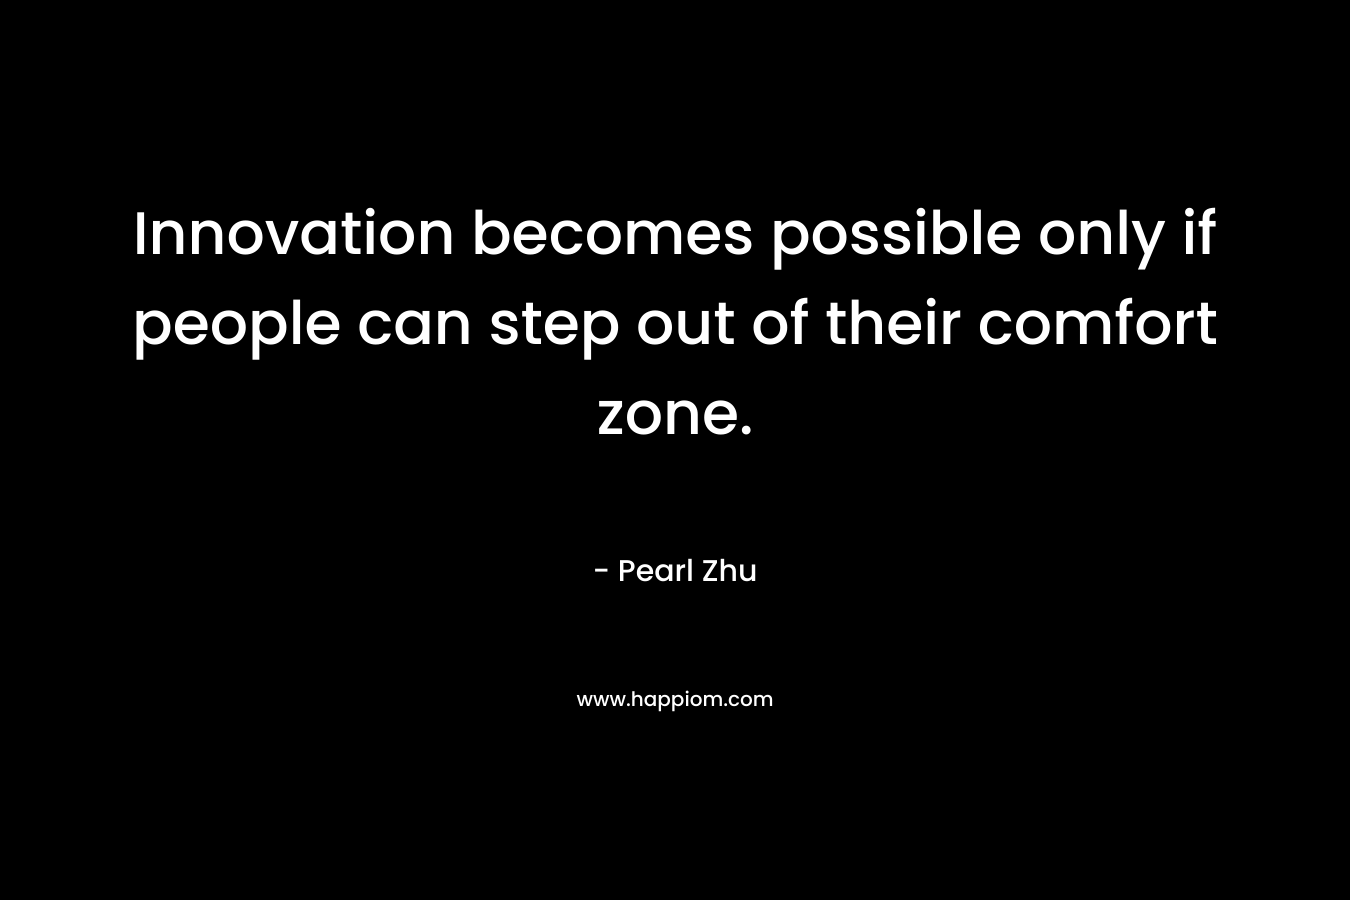 Innovation becomes possible only if people can step out of their comfort zone. – Pearl Zhu